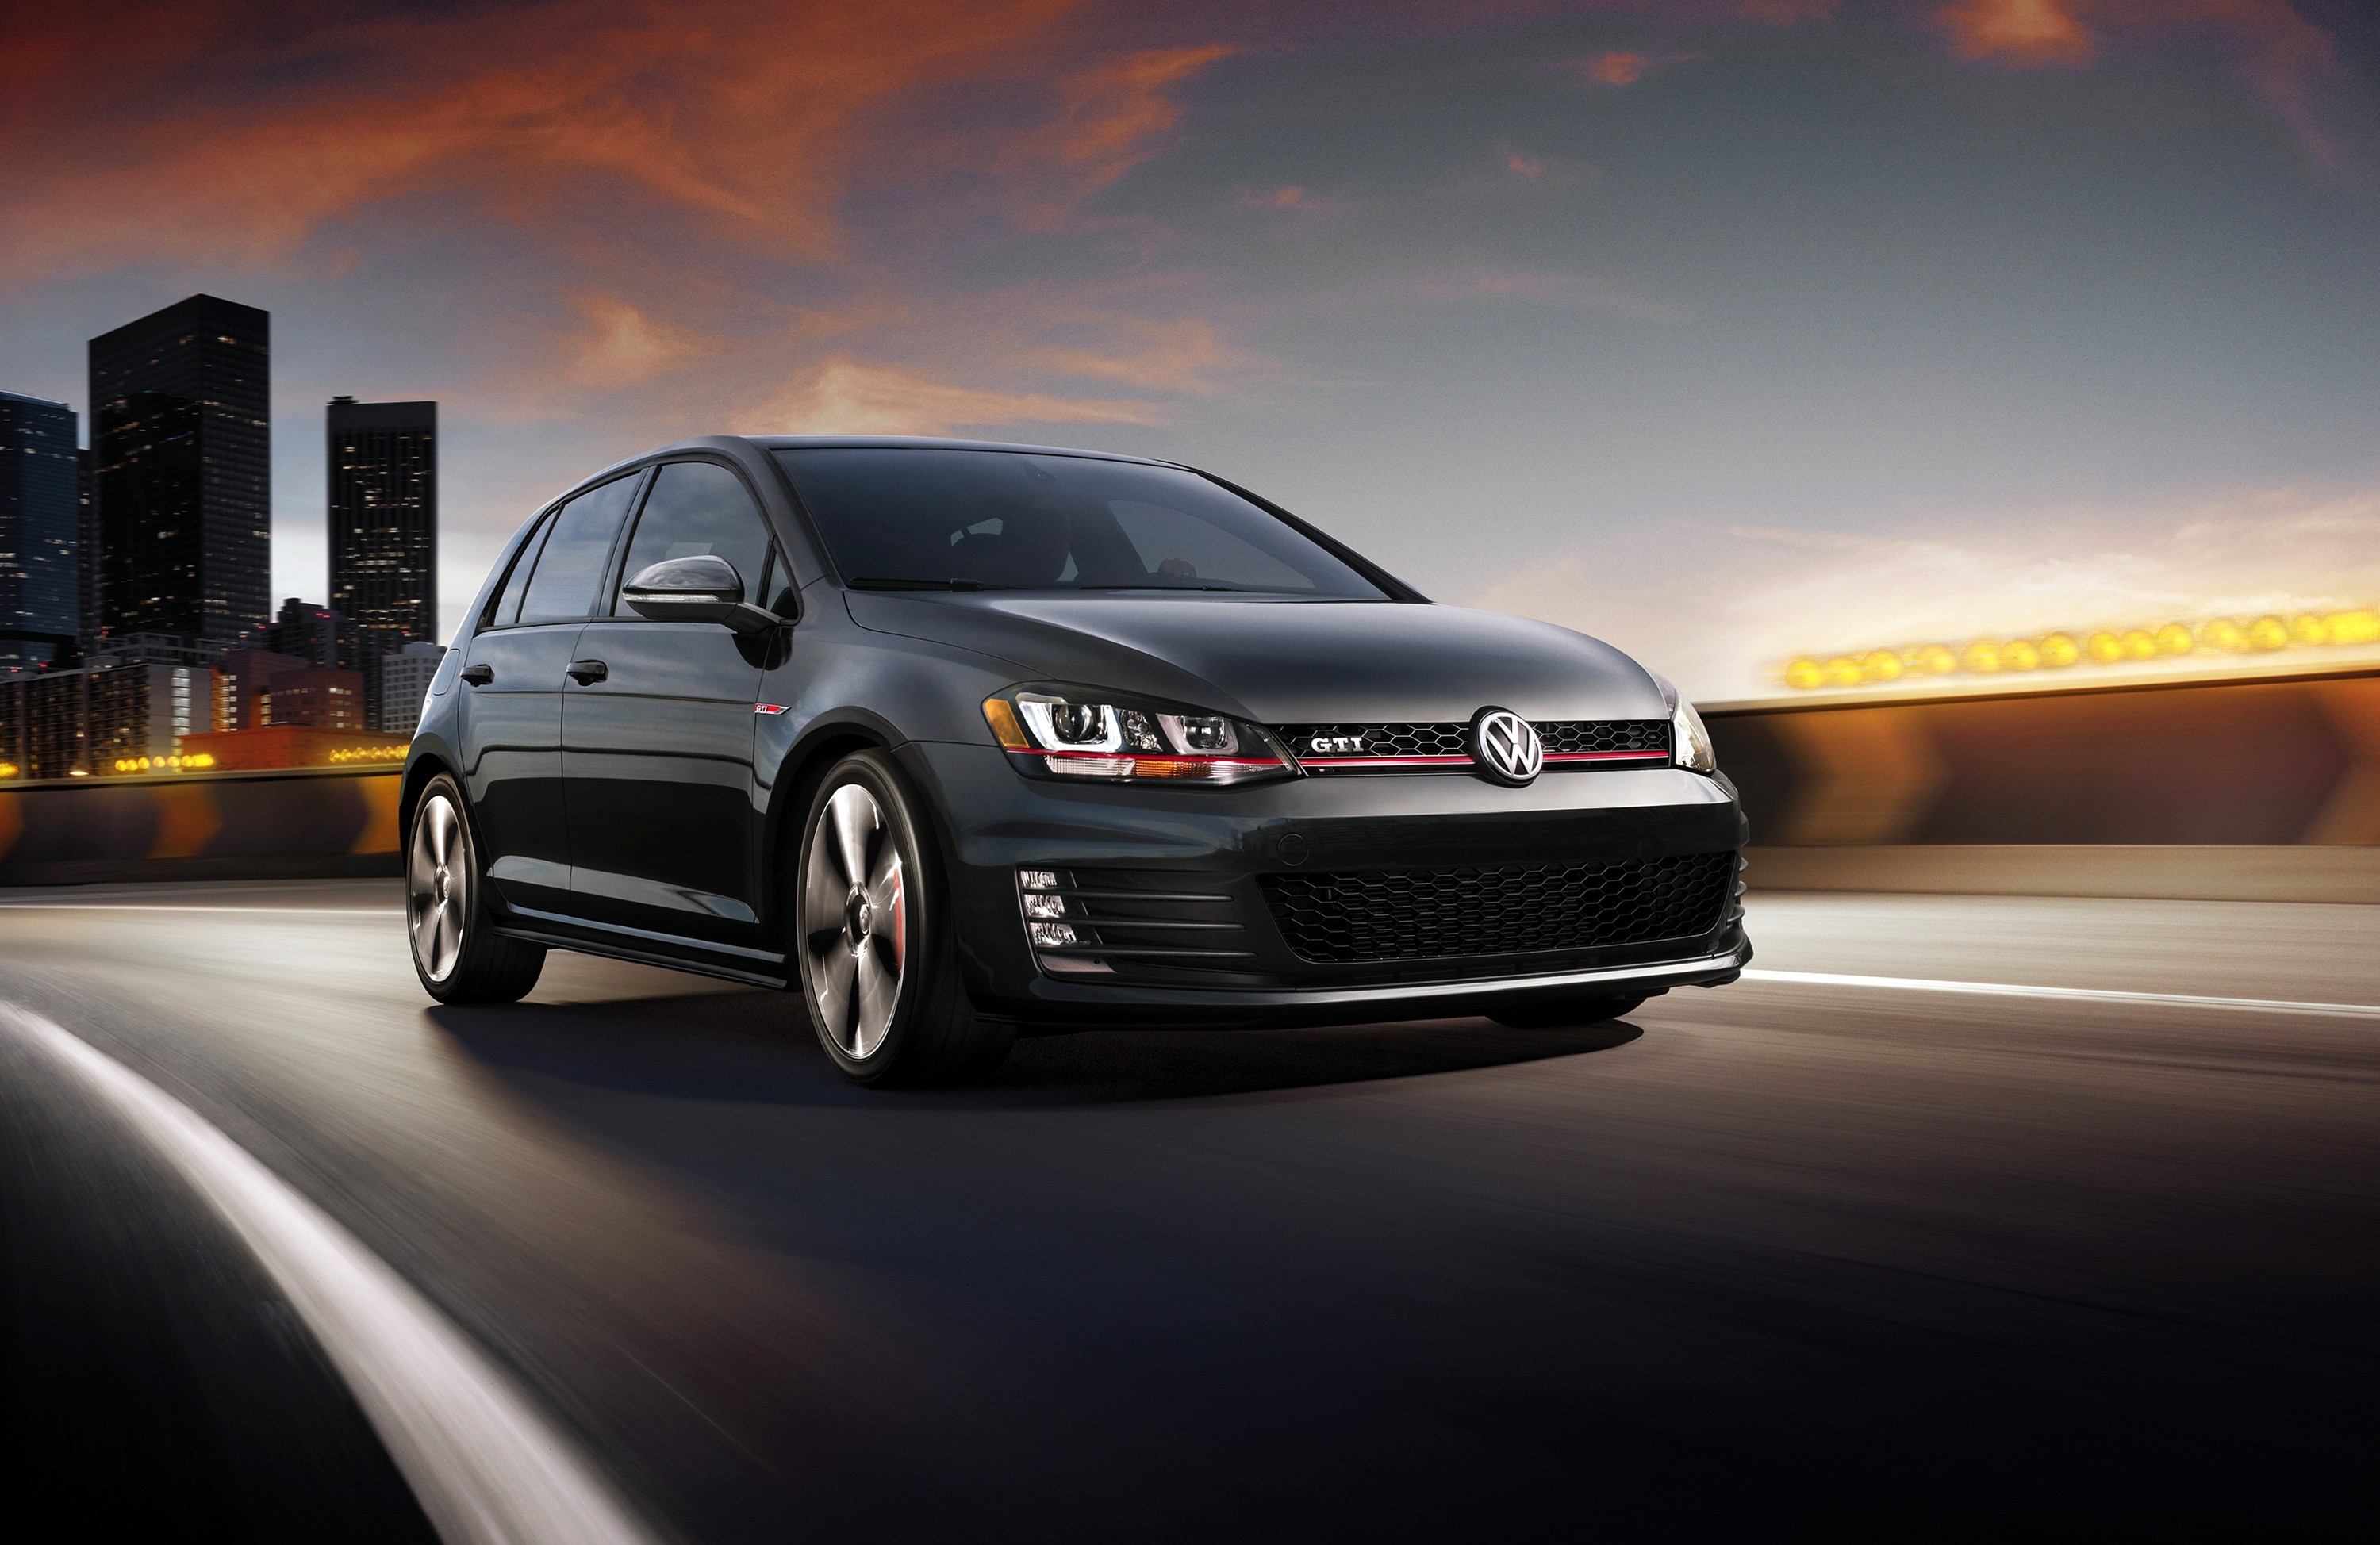 Stanced Vw Golf Gti Wallpapers